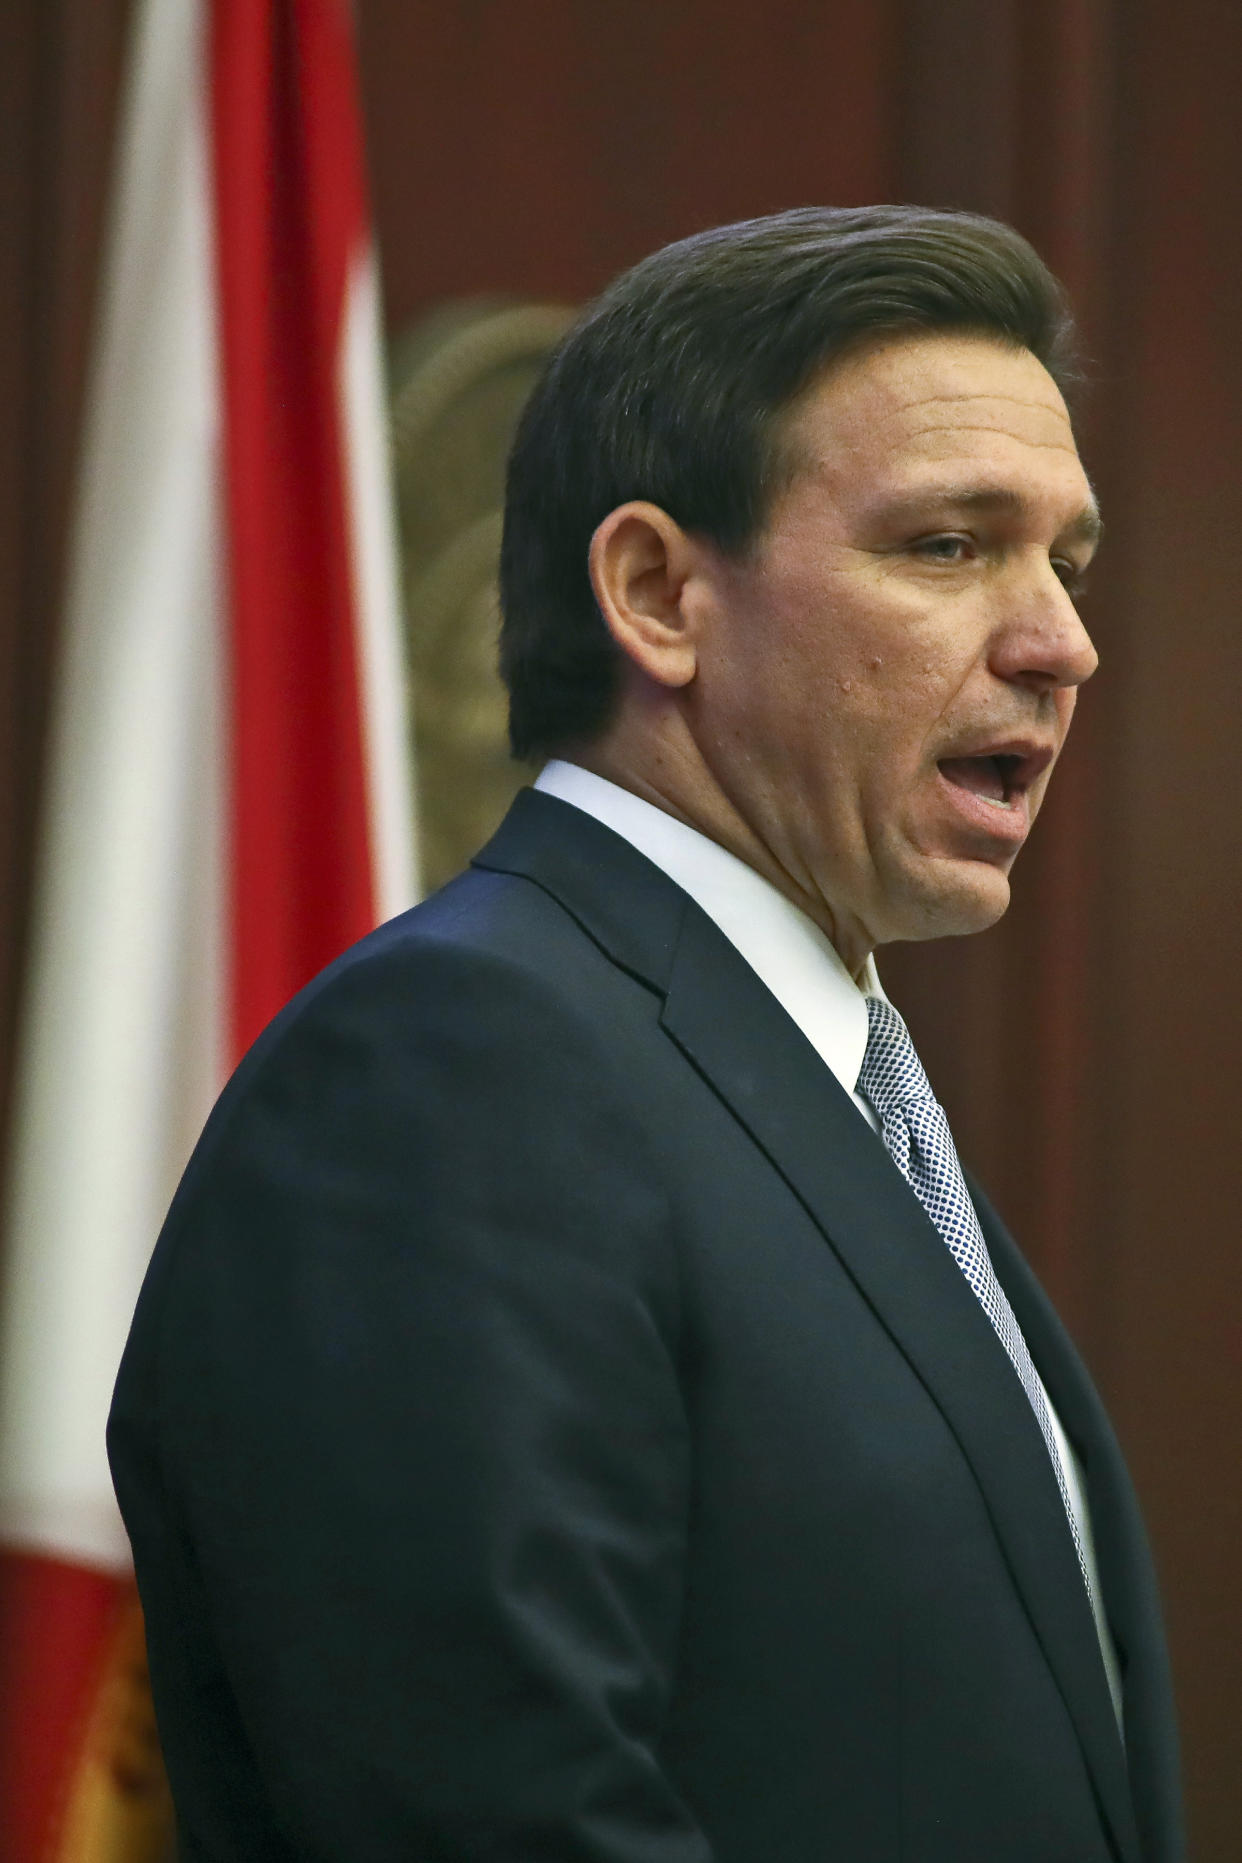 Florida Gov. Ron DeSantis gives his State of the State address during a joint session of the Senate and House of Representatives Tuesday, March 7, 2023, at the Capitol in Tallahassee, Fla. (AP Photo/Phil Sears)